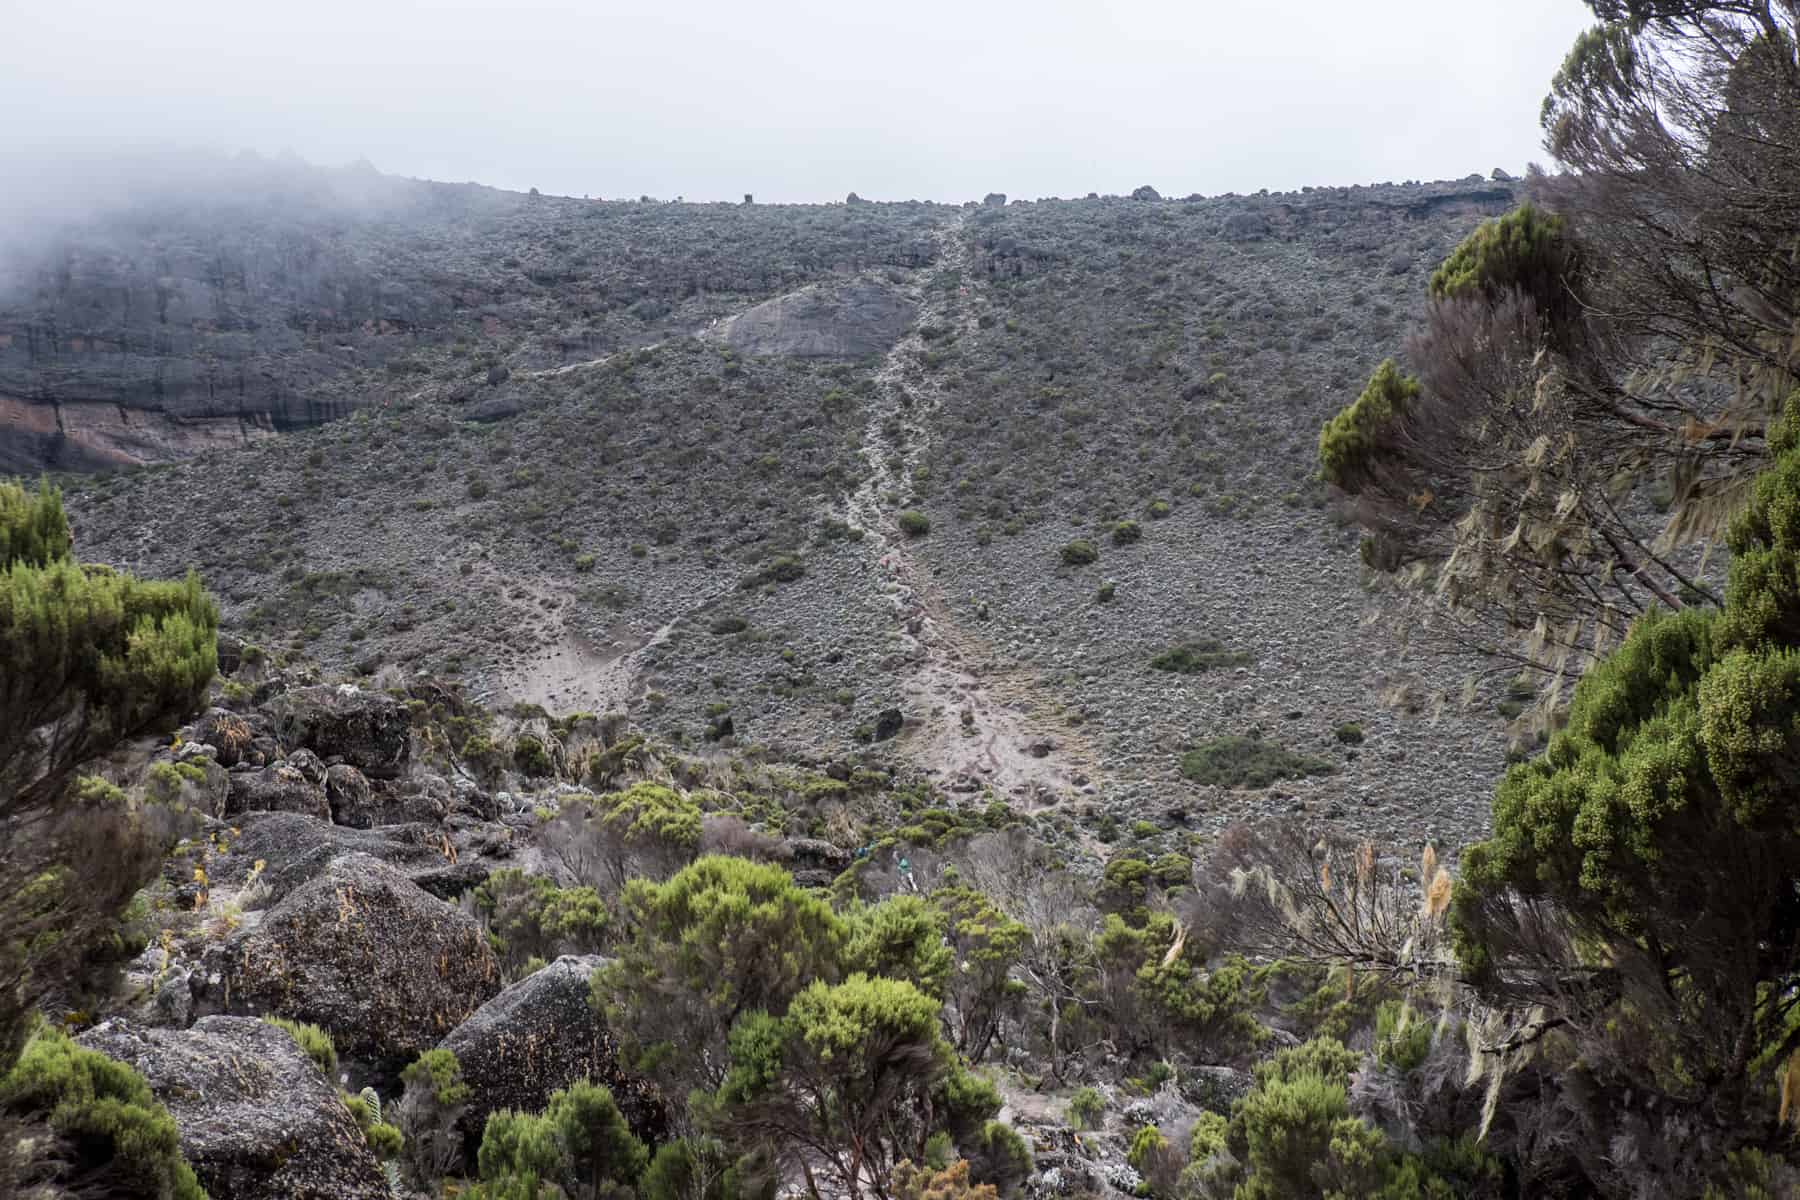 Beyond the think vegetation, a beige worn path lightly snakes up a very steep grey-green rock face on Mt. Kilimanjaro